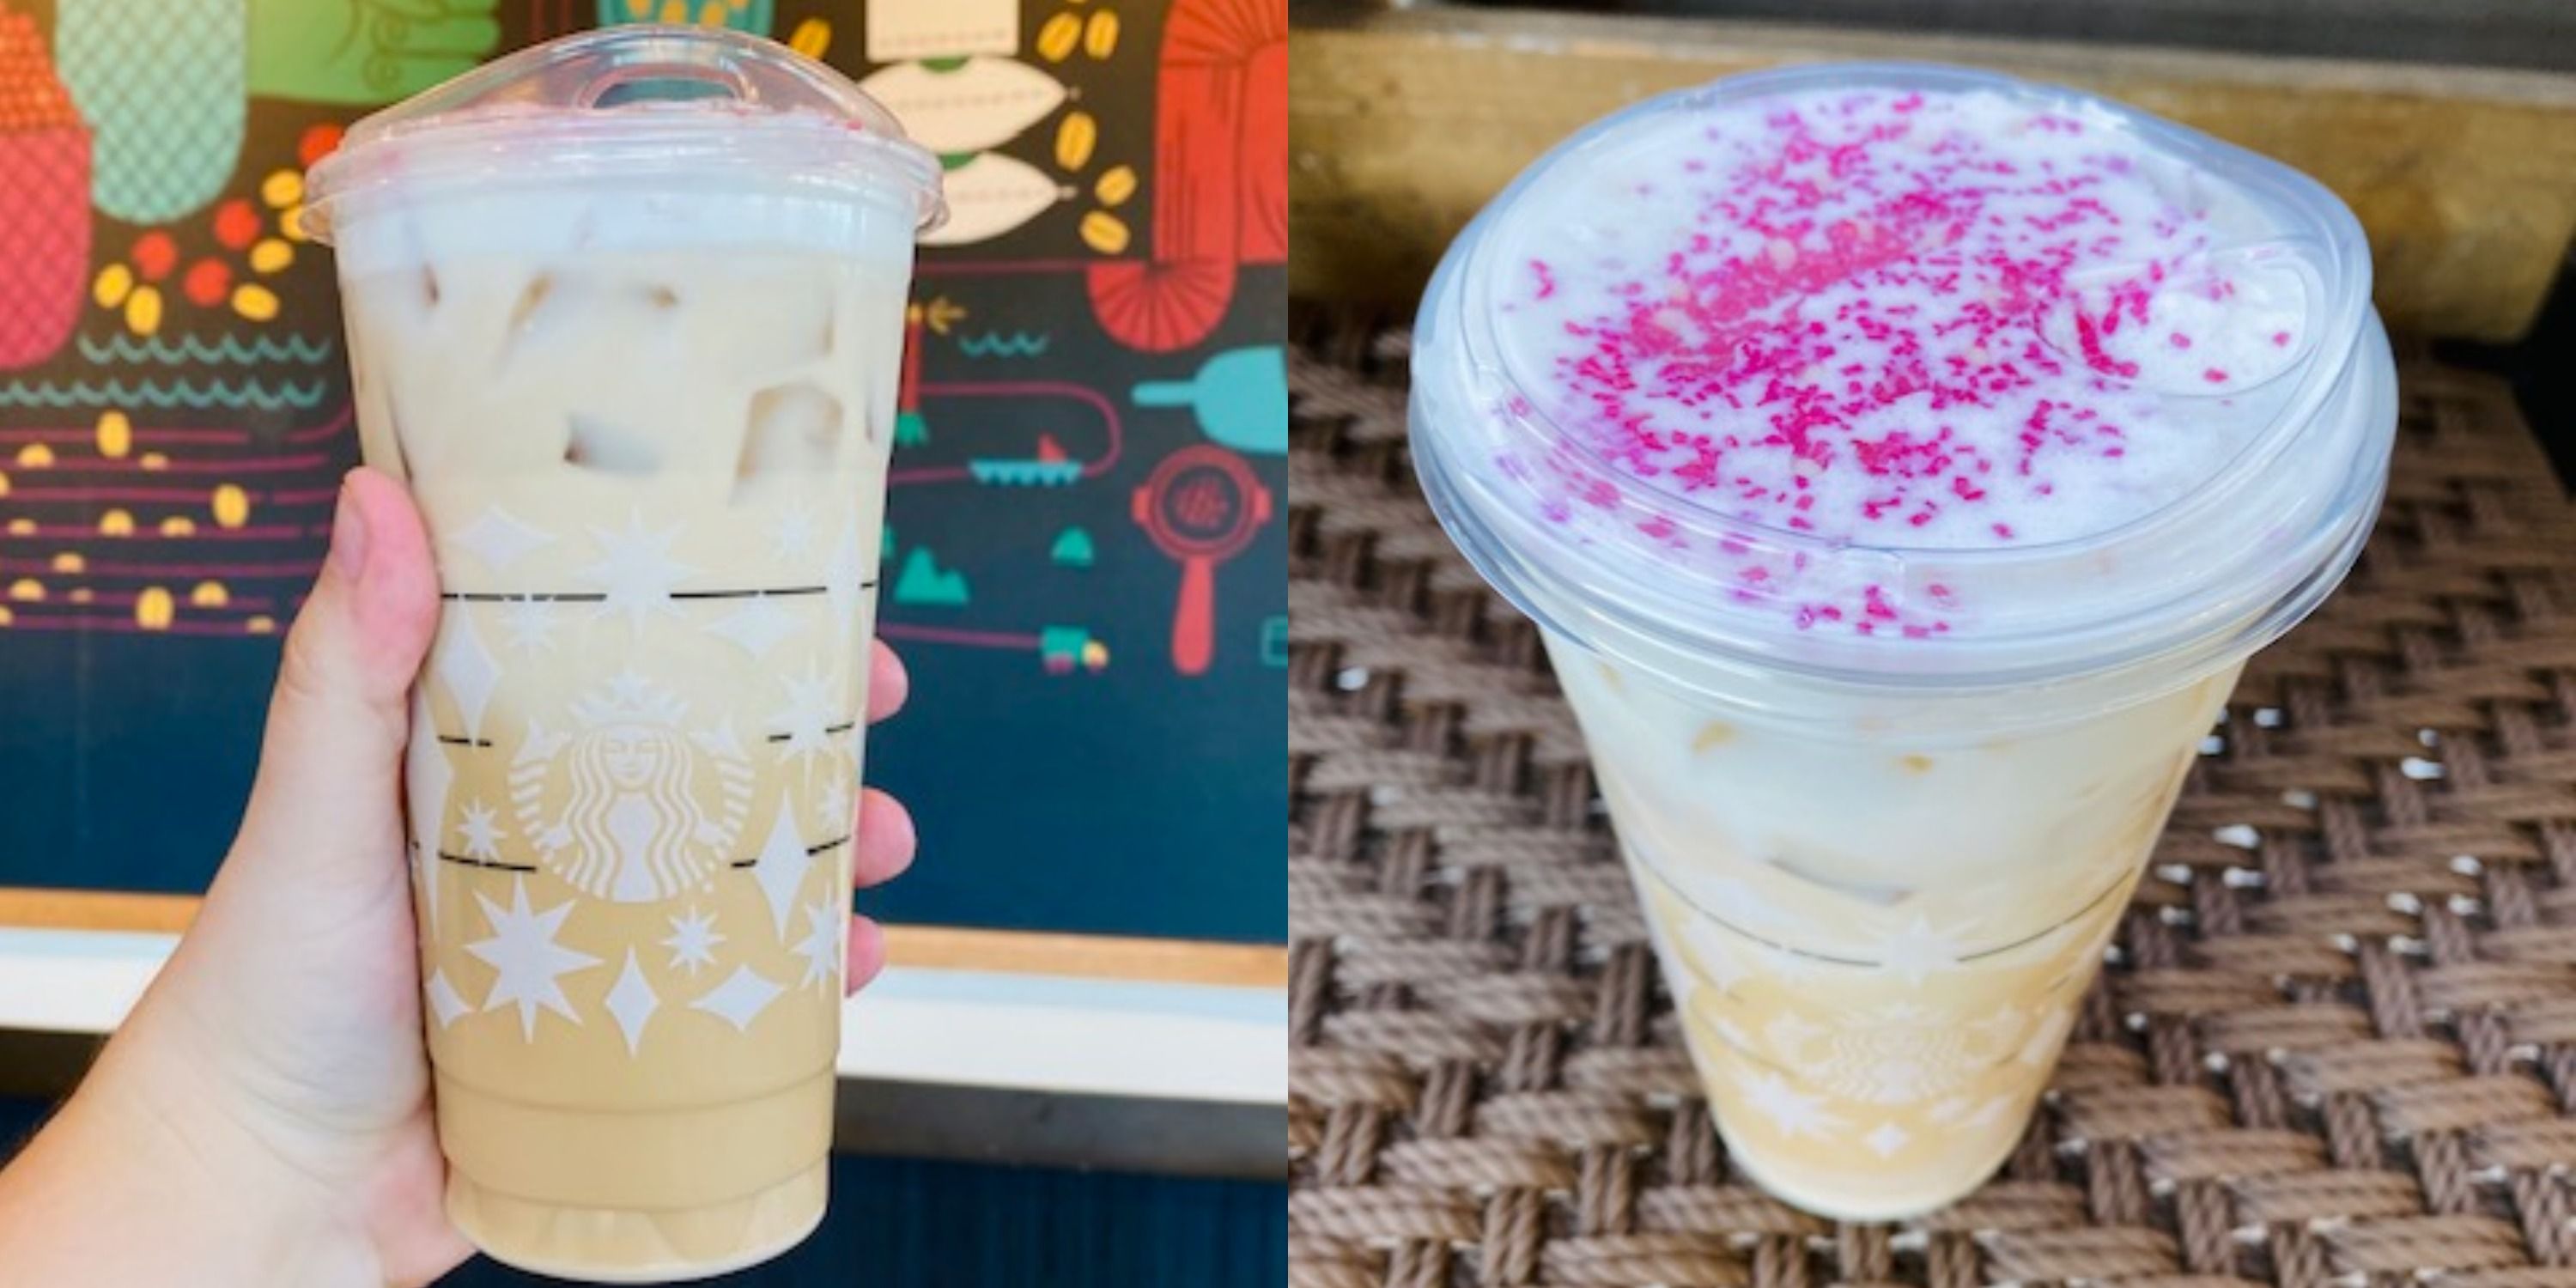 How To Order A Candy Cane Cold Brew From Starbucks